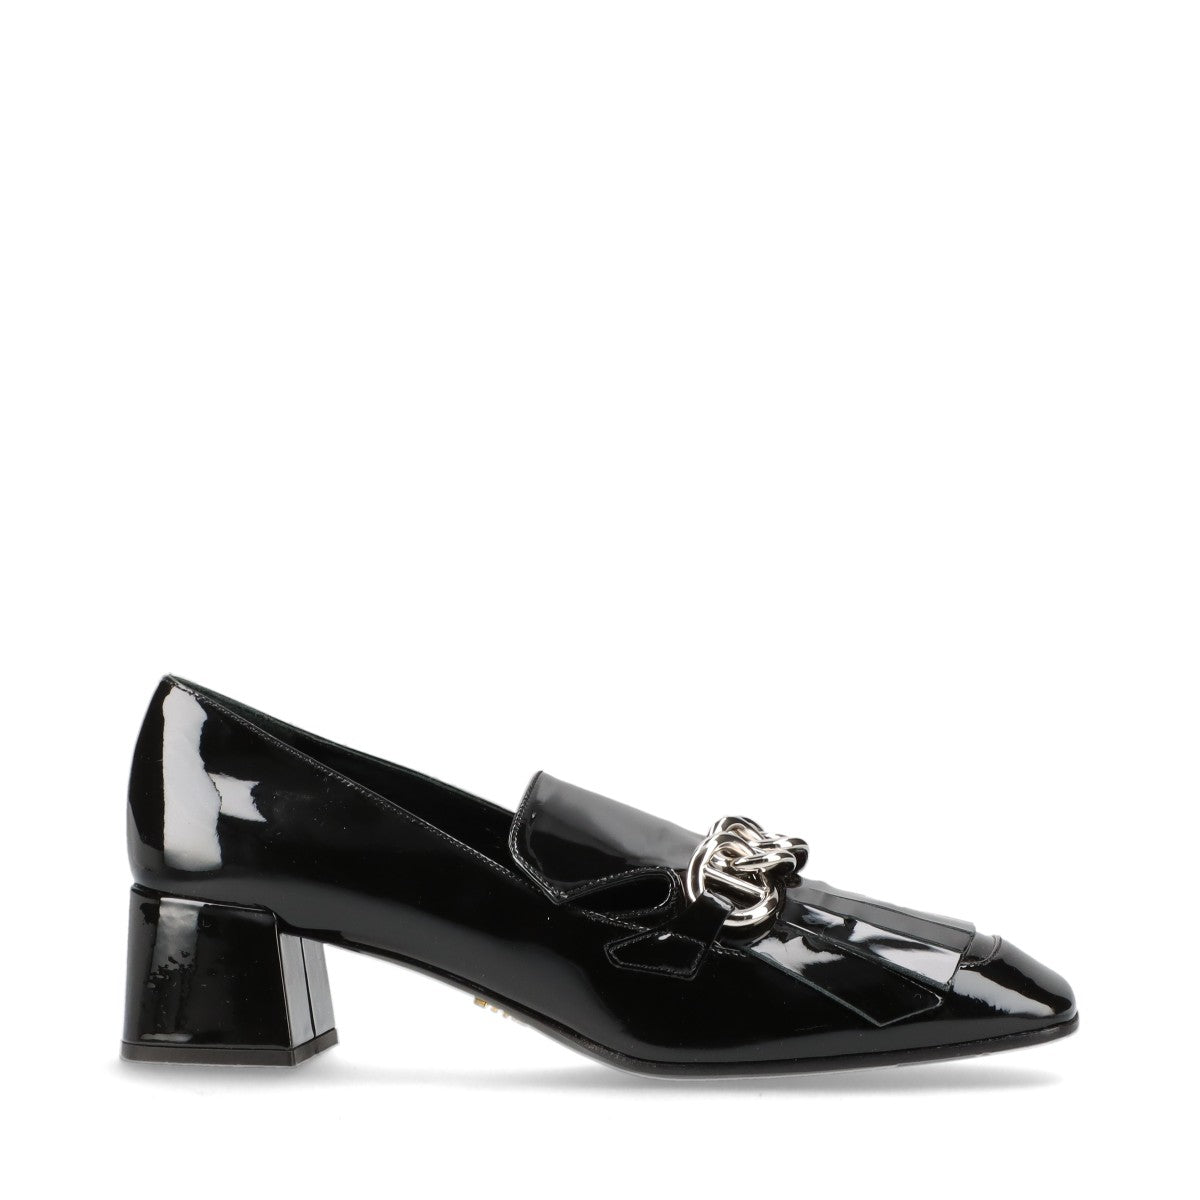 Prada Patent Leather Loafer EU38.5 Ladies' Black Fringe Chain There is a bag